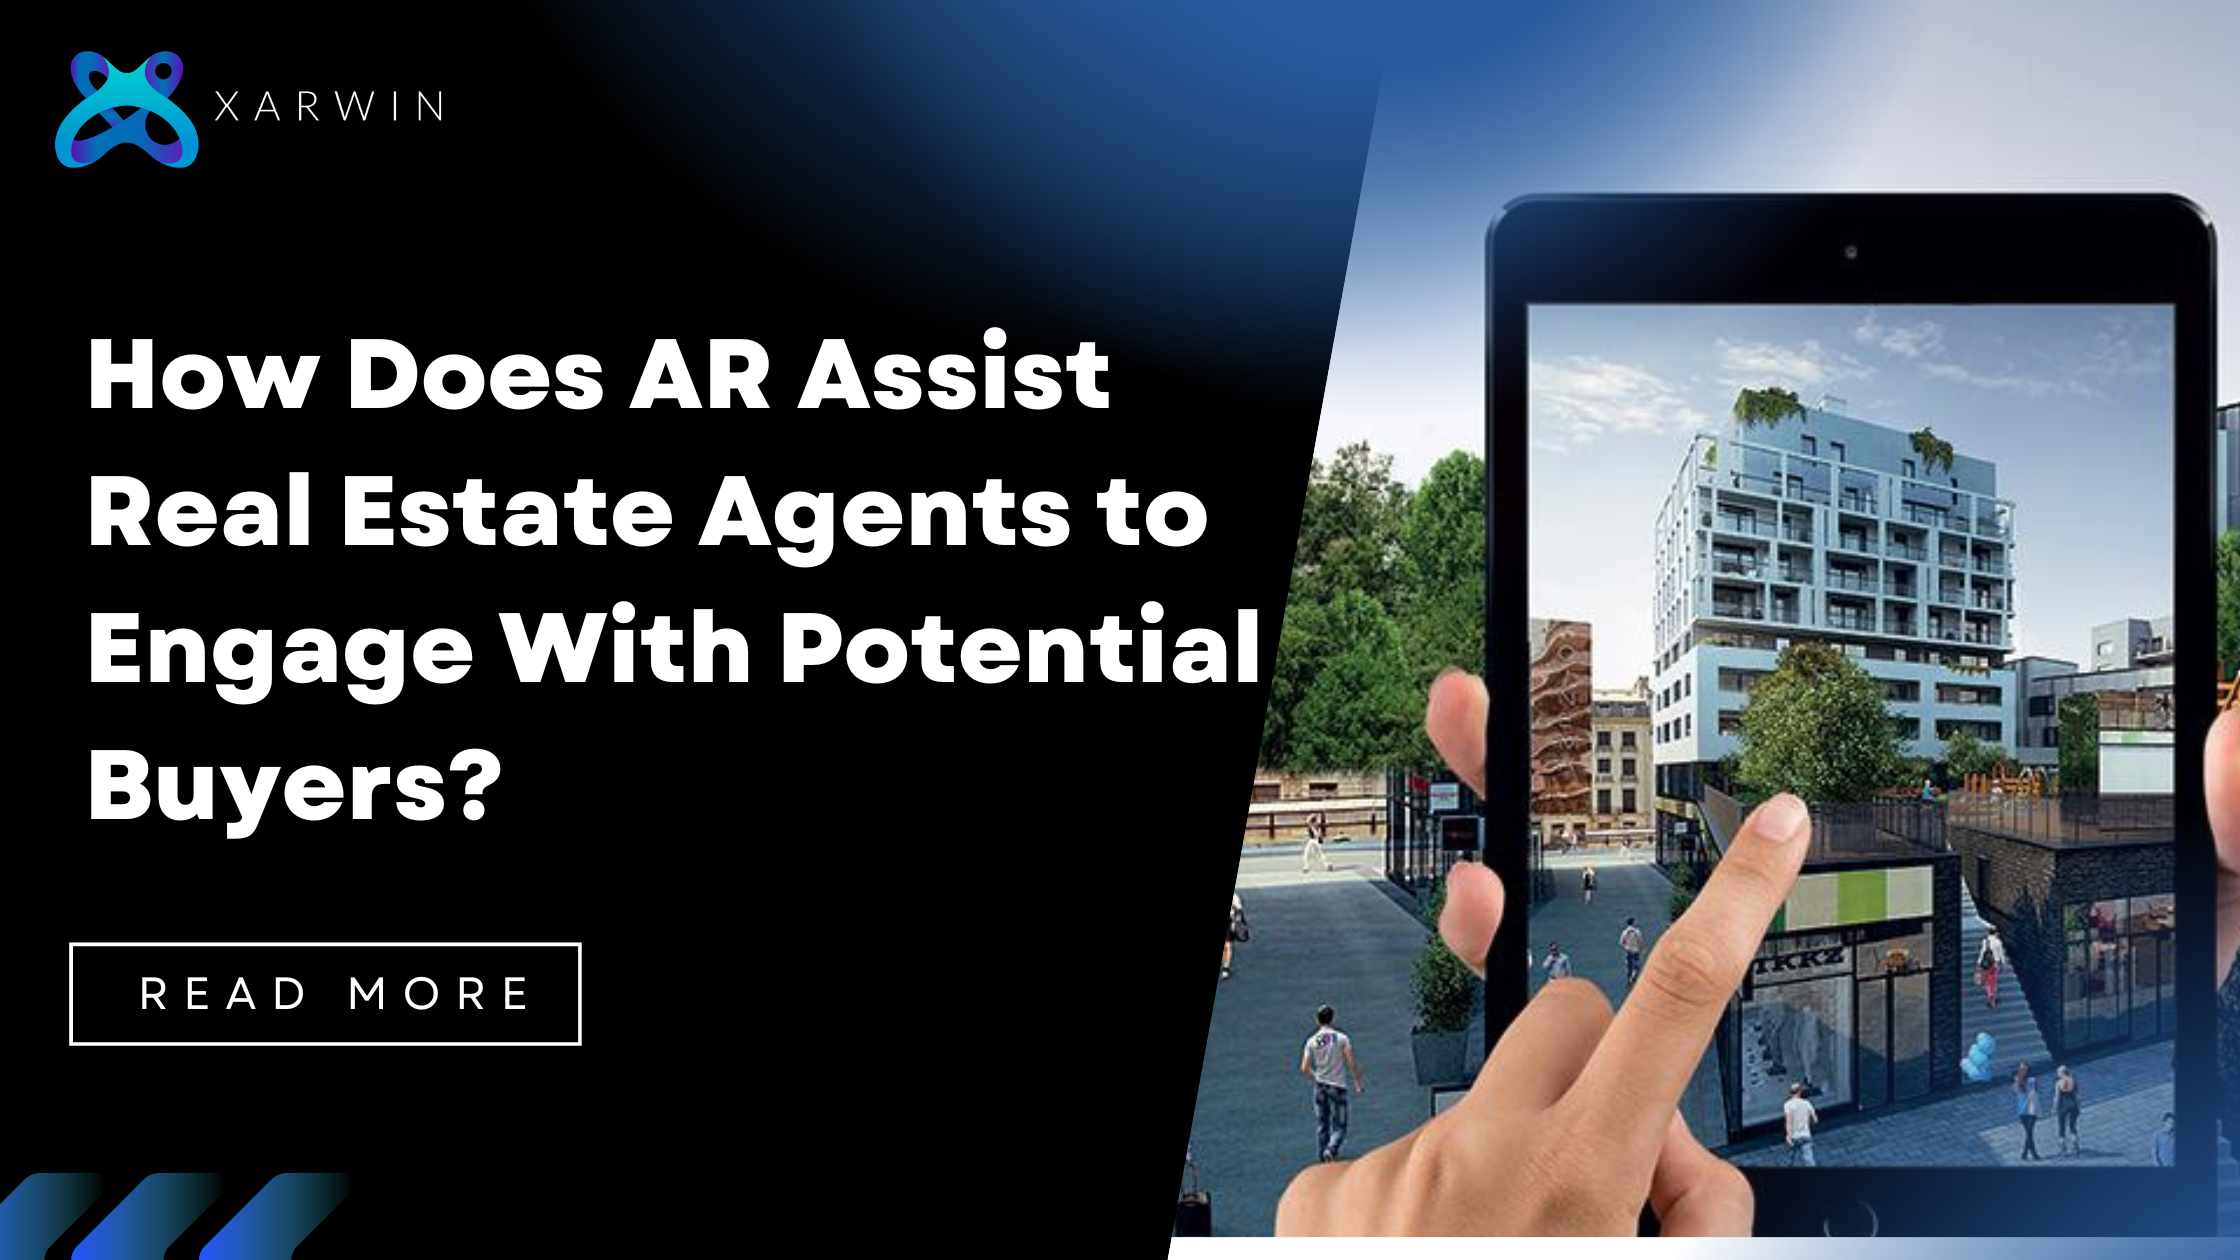 How Does Ar Assist Real Estate Agents to Engage With Potential Buyers